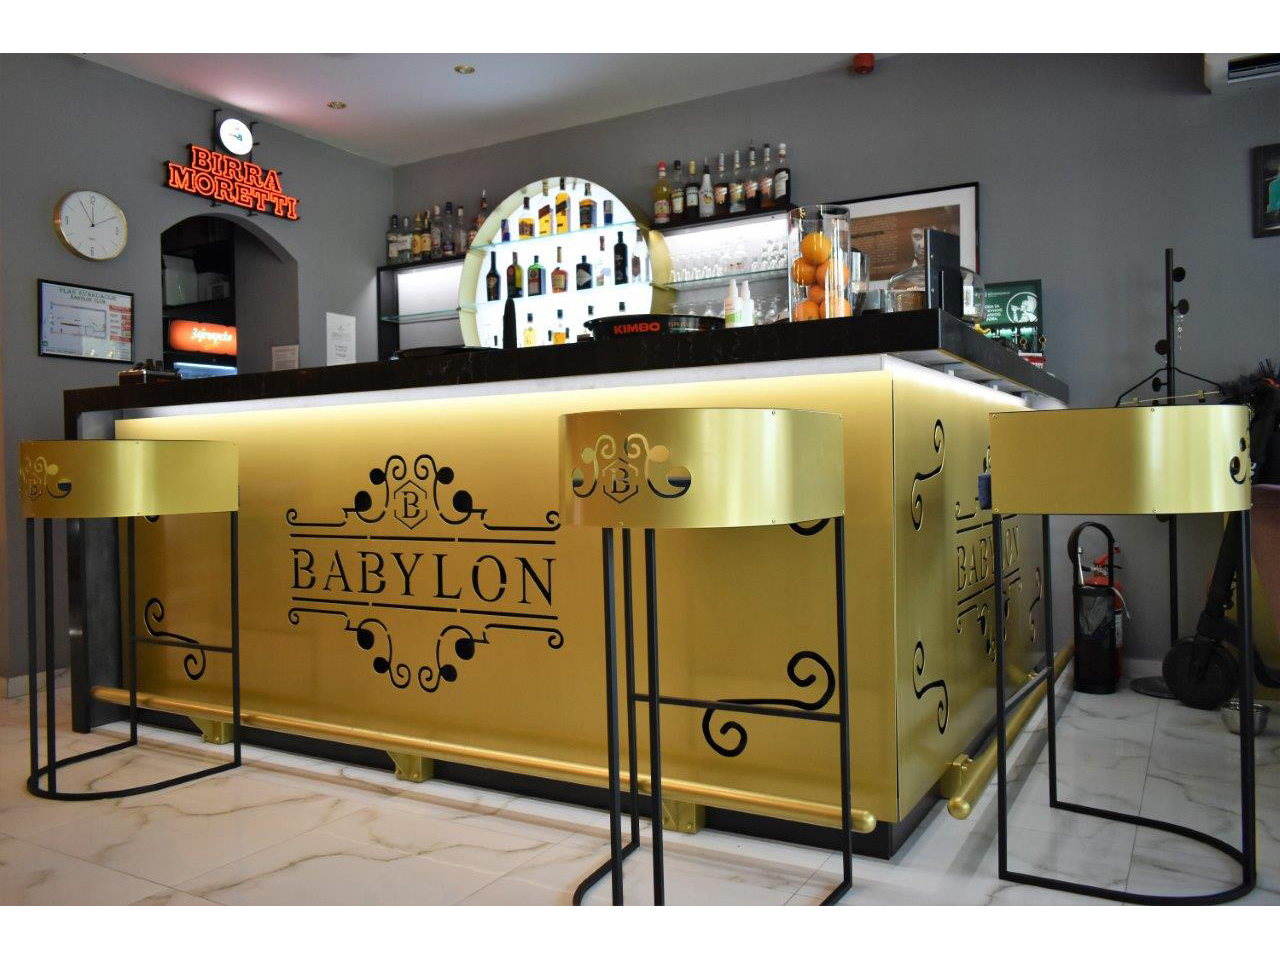 BABYLON CLUB Spaces for celebrations, parties, birthdays Beograd